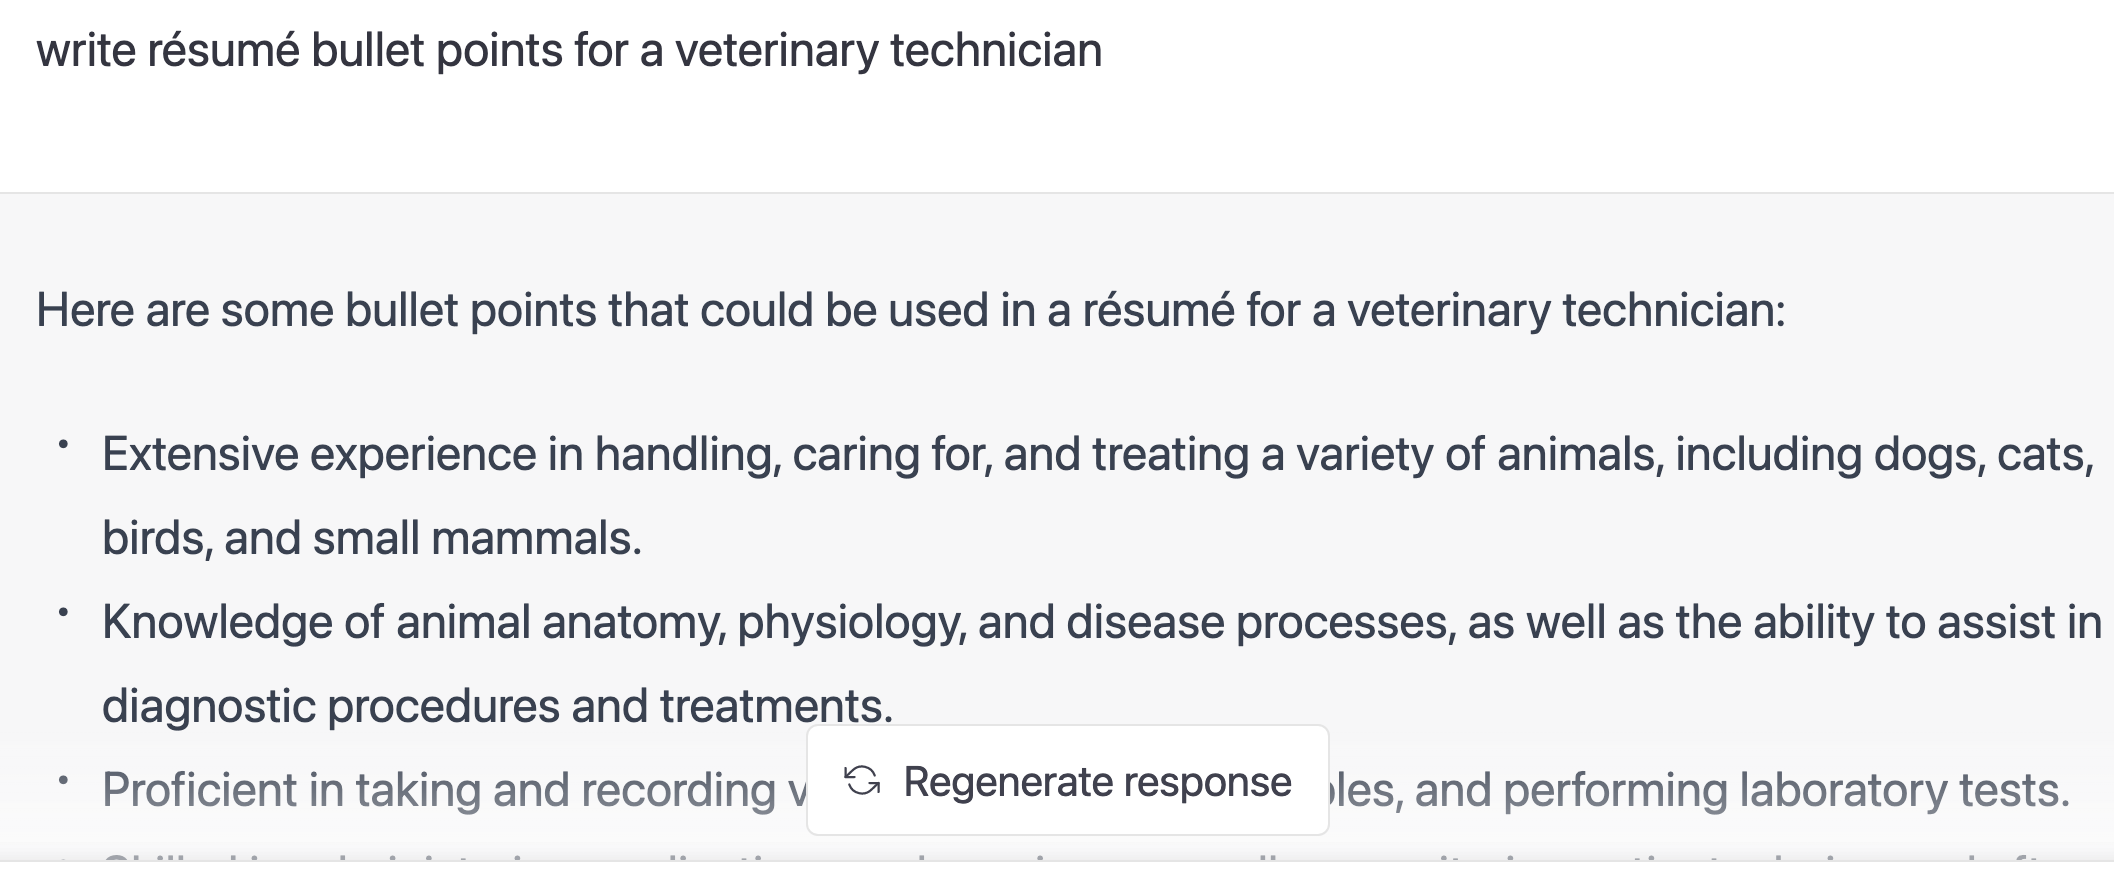 sample ChatGPT bullet points for a veterinary technician resume